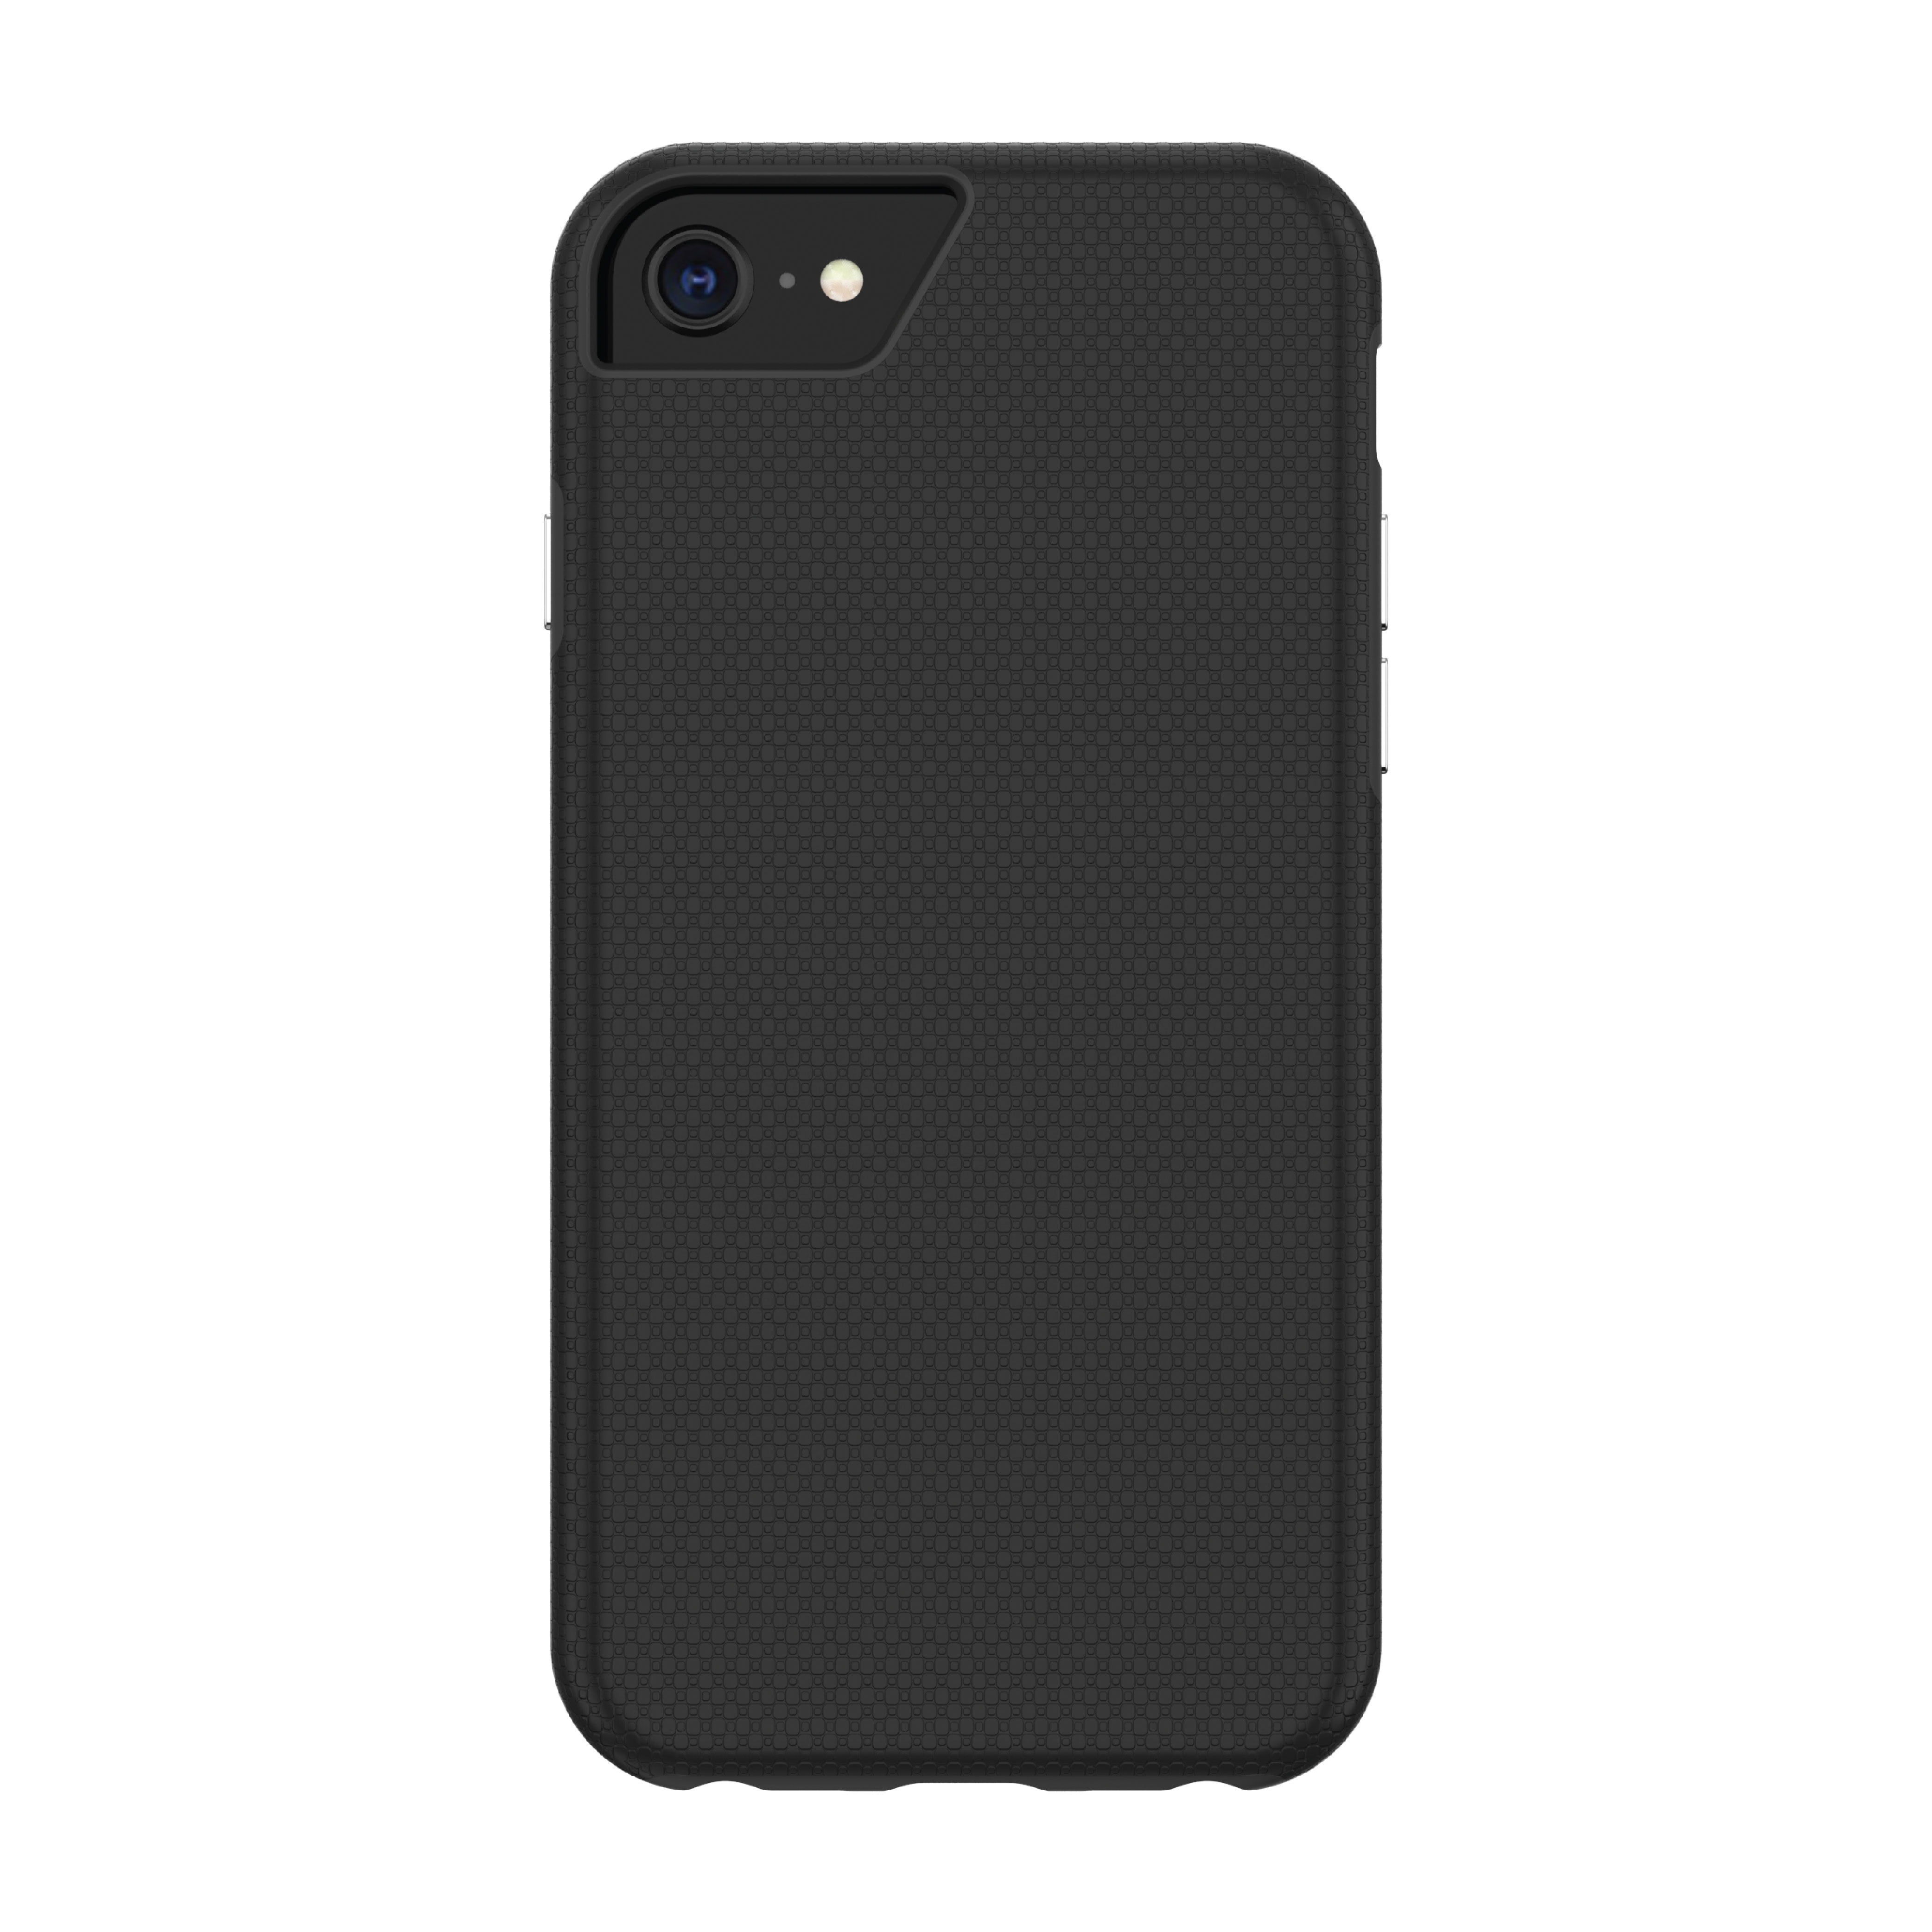 Onn. Dual-Layer Case for iPhone 6, iPhone 6S, iPhone 7, iPhone 8, iPhone SE (2020)